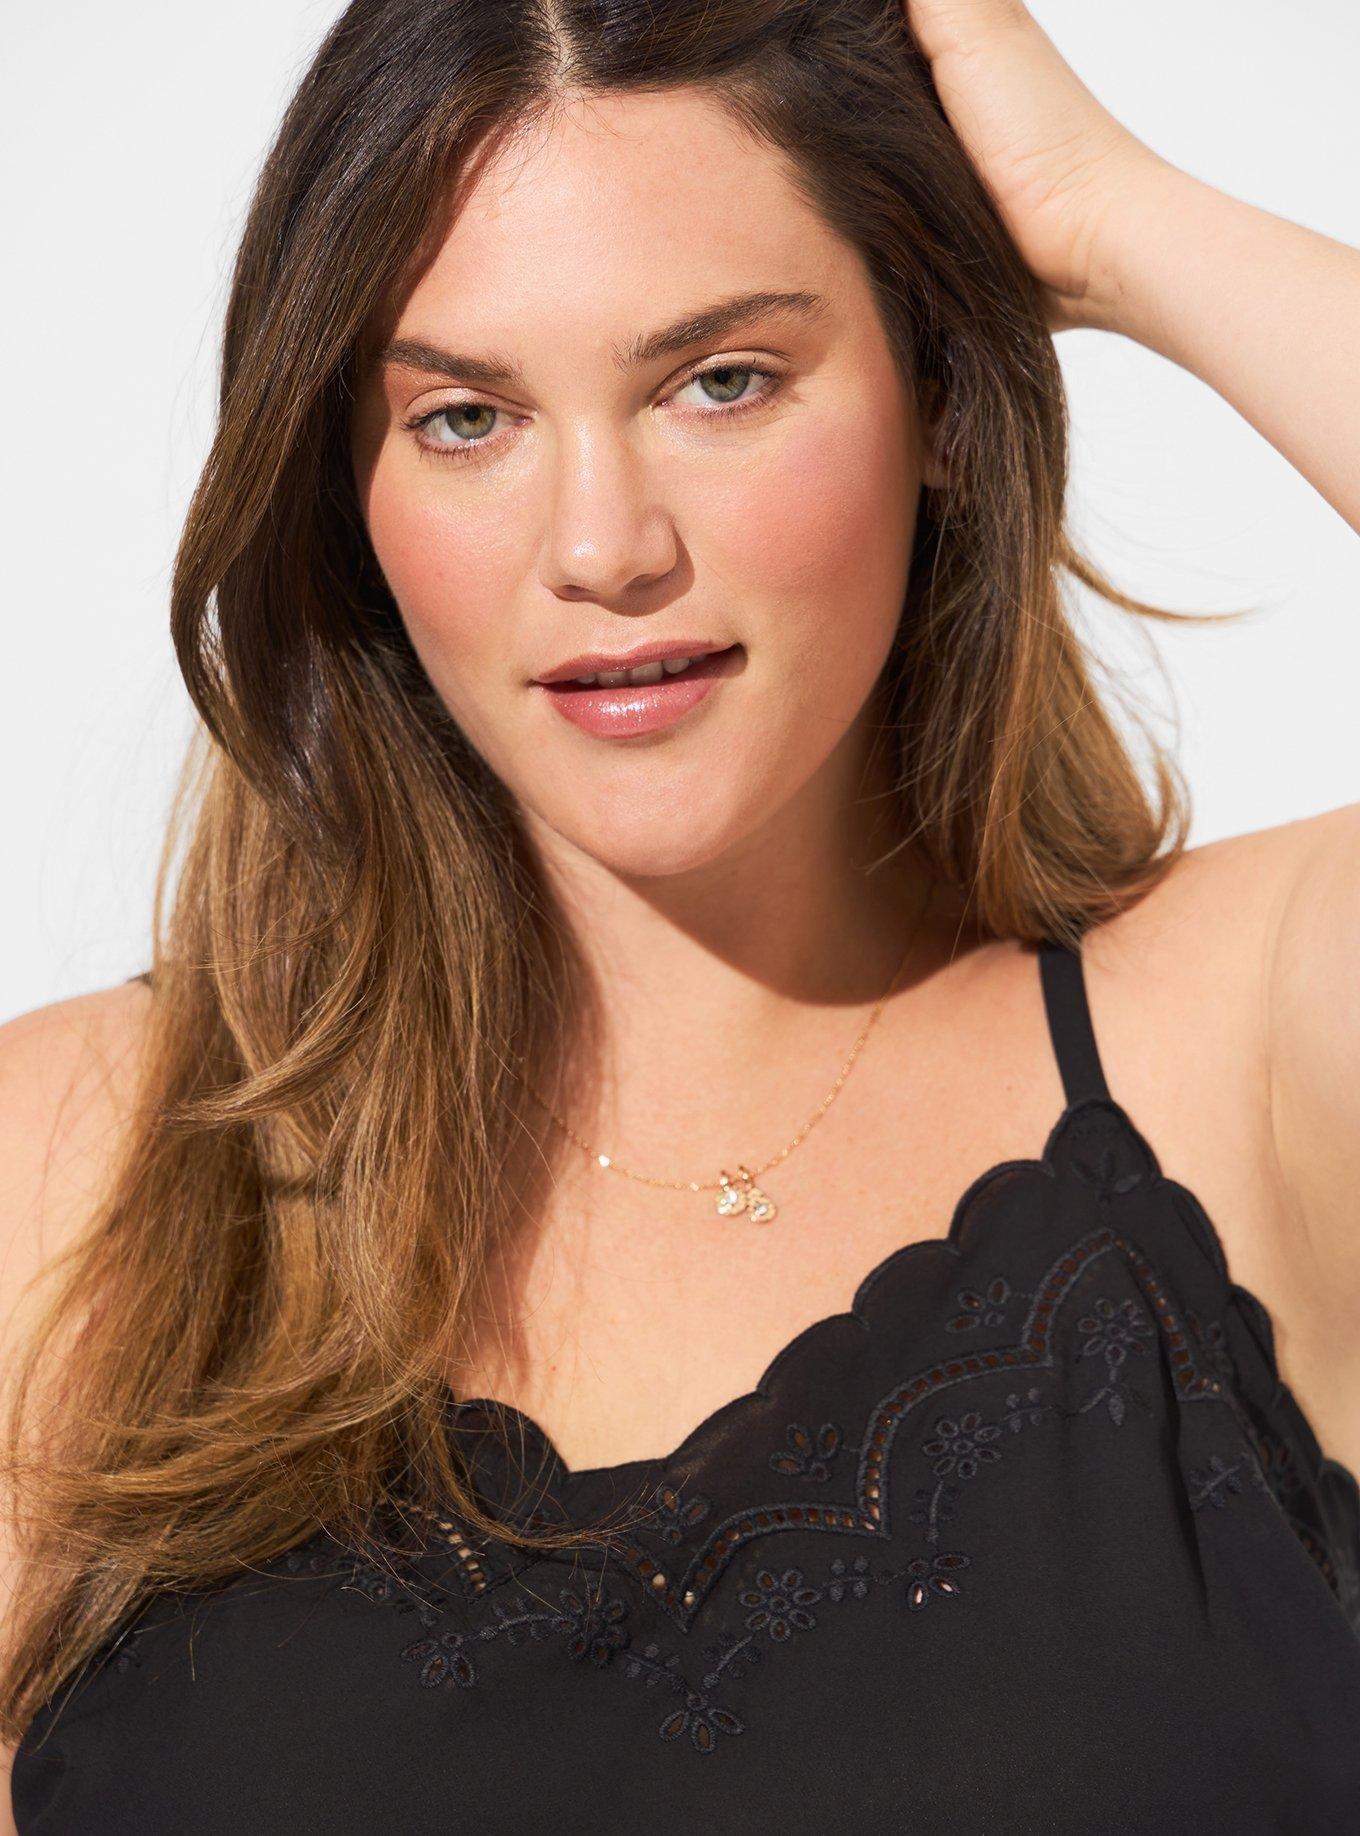 Plus Size - Sophie Georgette Embroidered Cami - Torrid